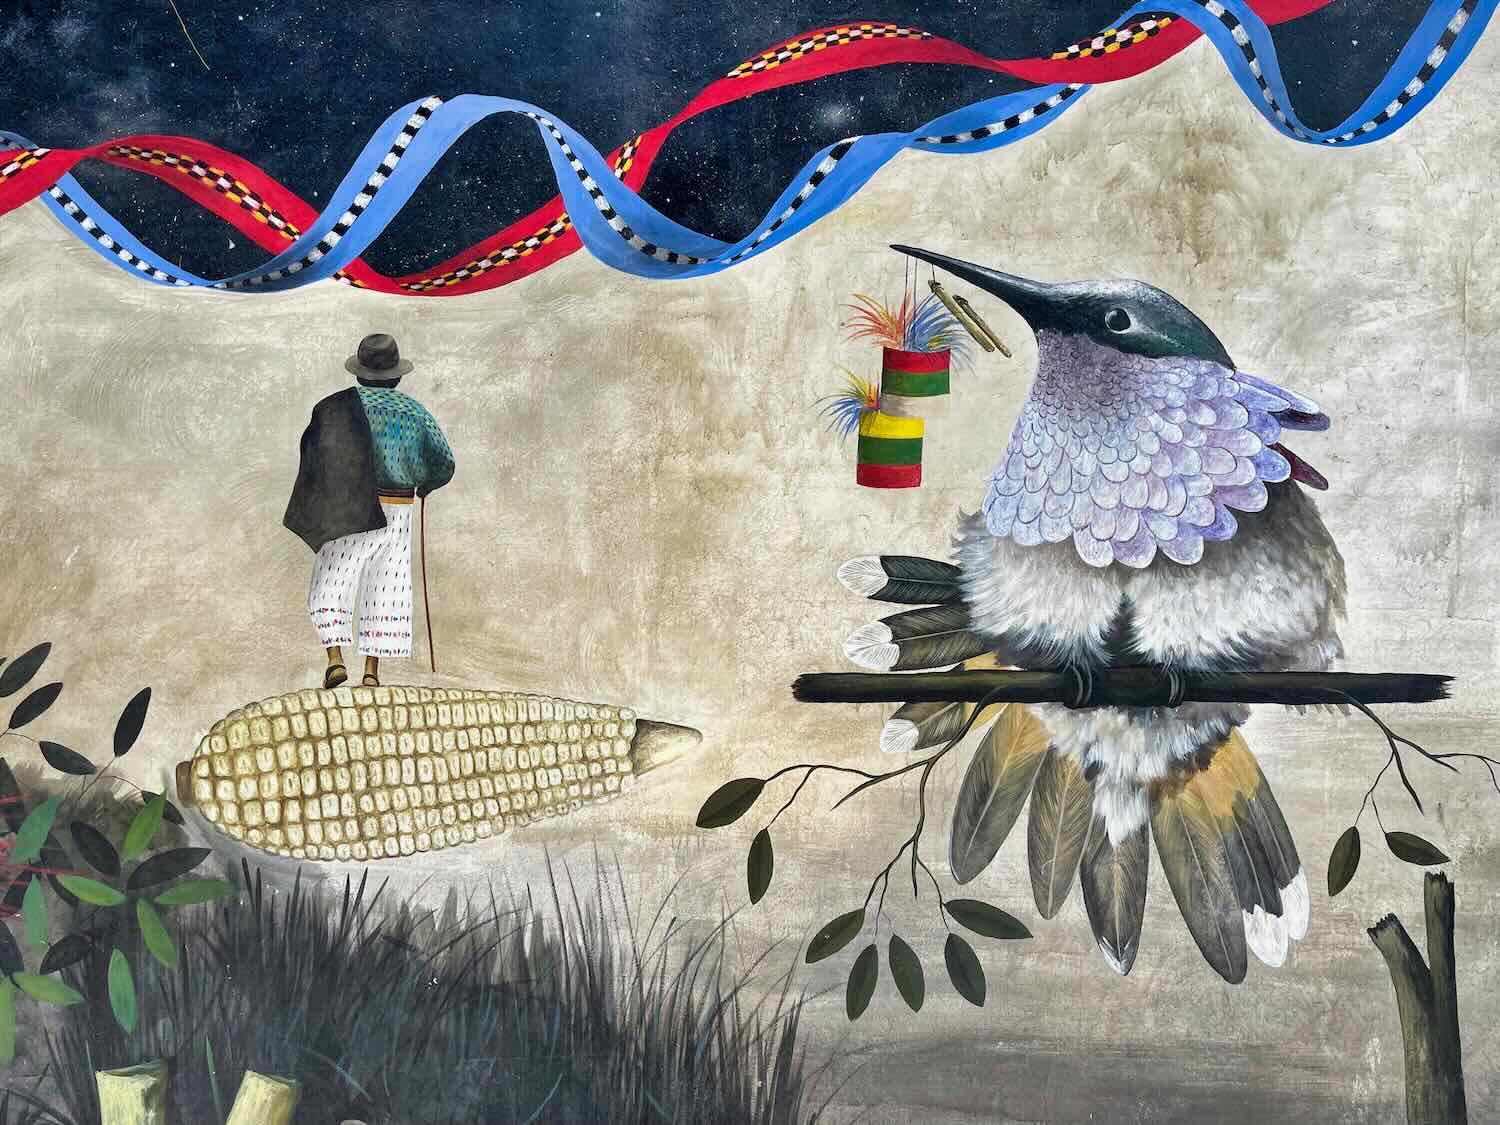 Corn provides the path, while a hummingbird holds a 'ronron' (a traditional, Guatemalan noise-making toy)